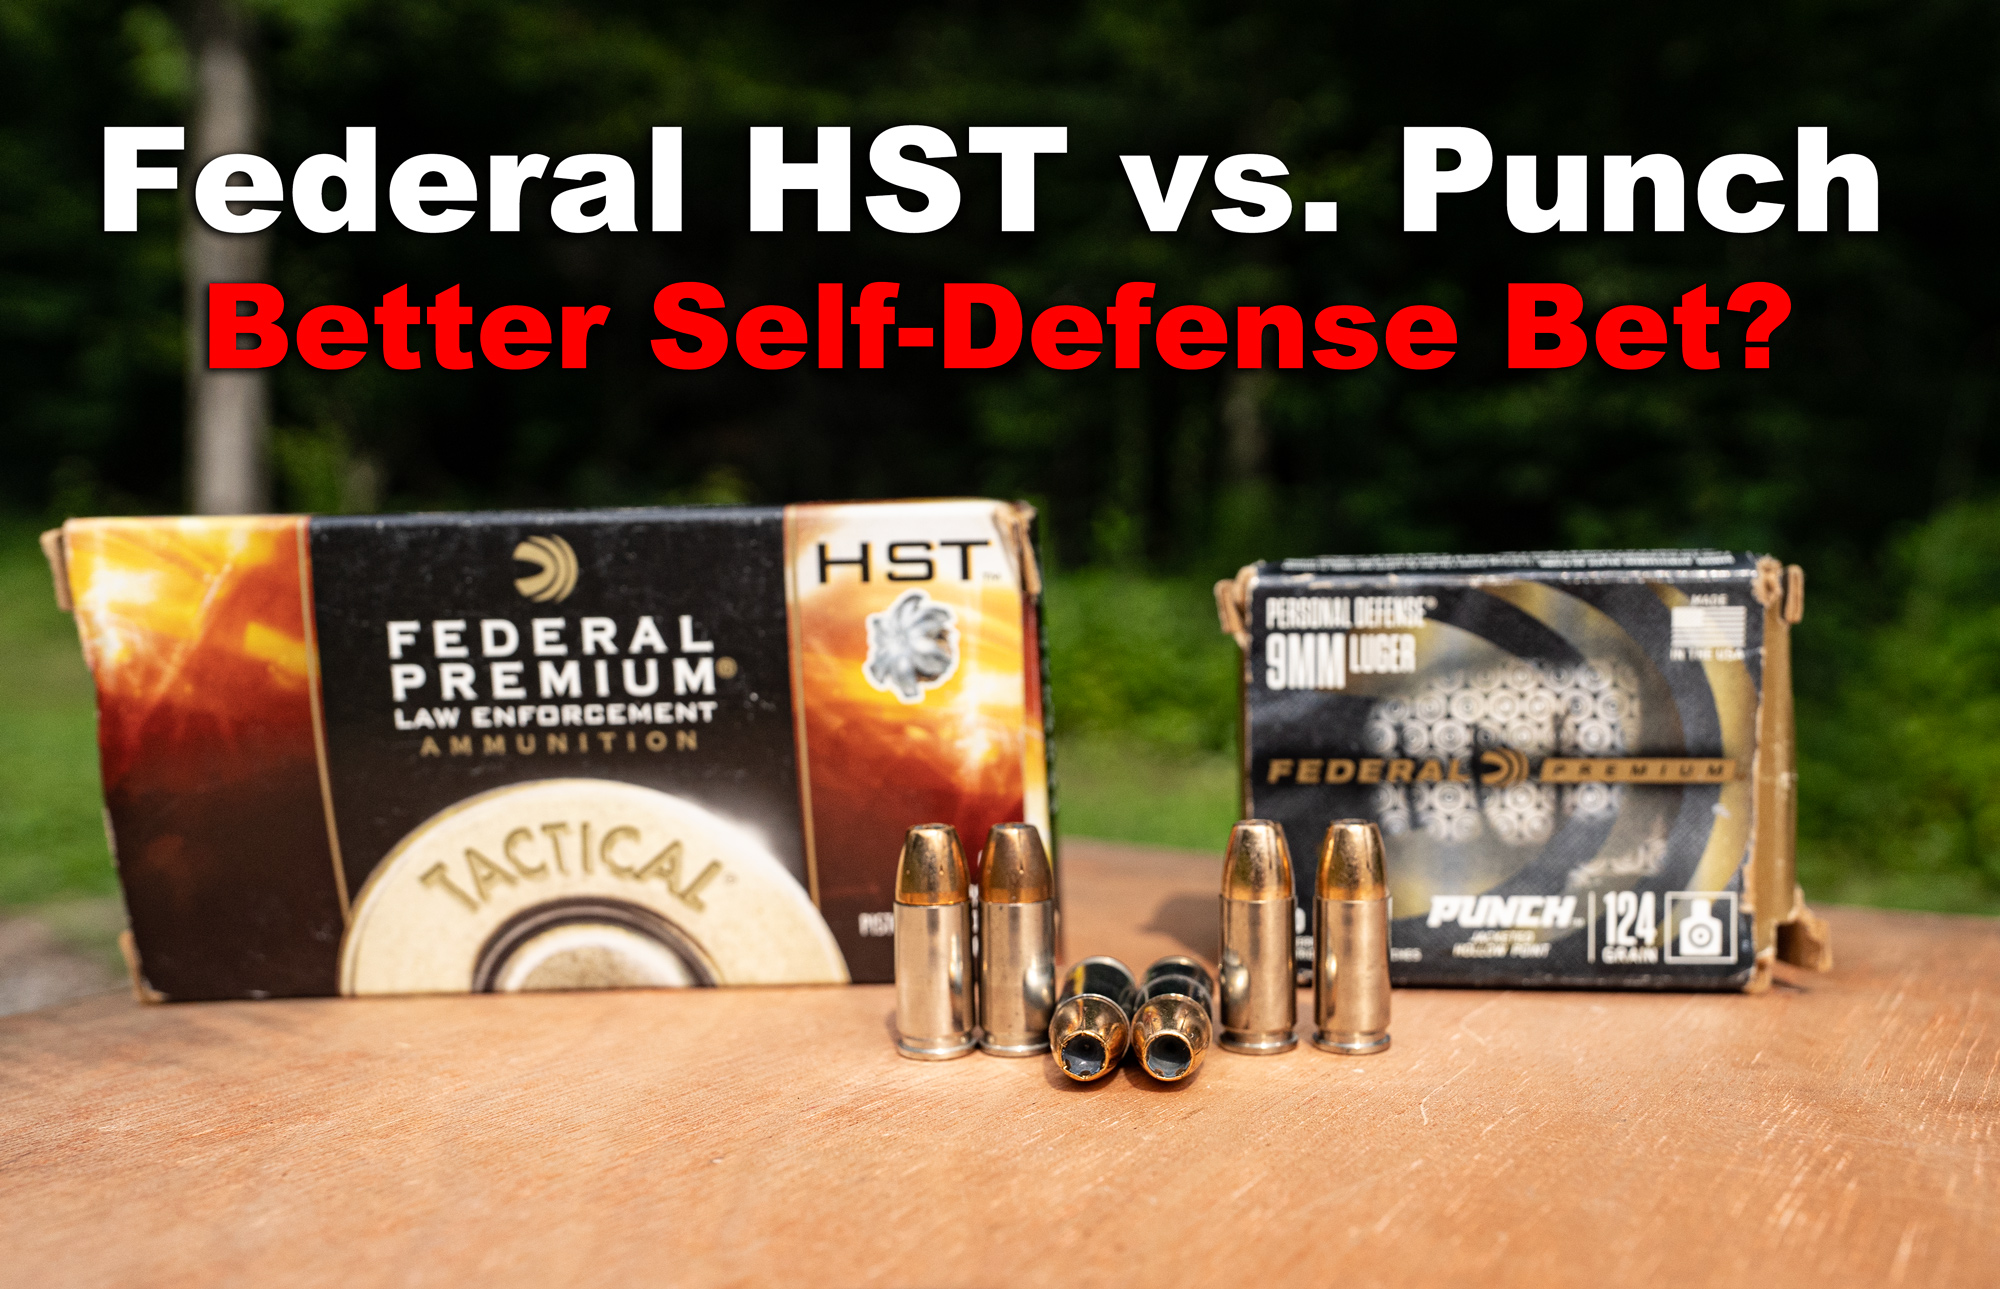 Federal HST and Federal Punch ammo at a shooting range